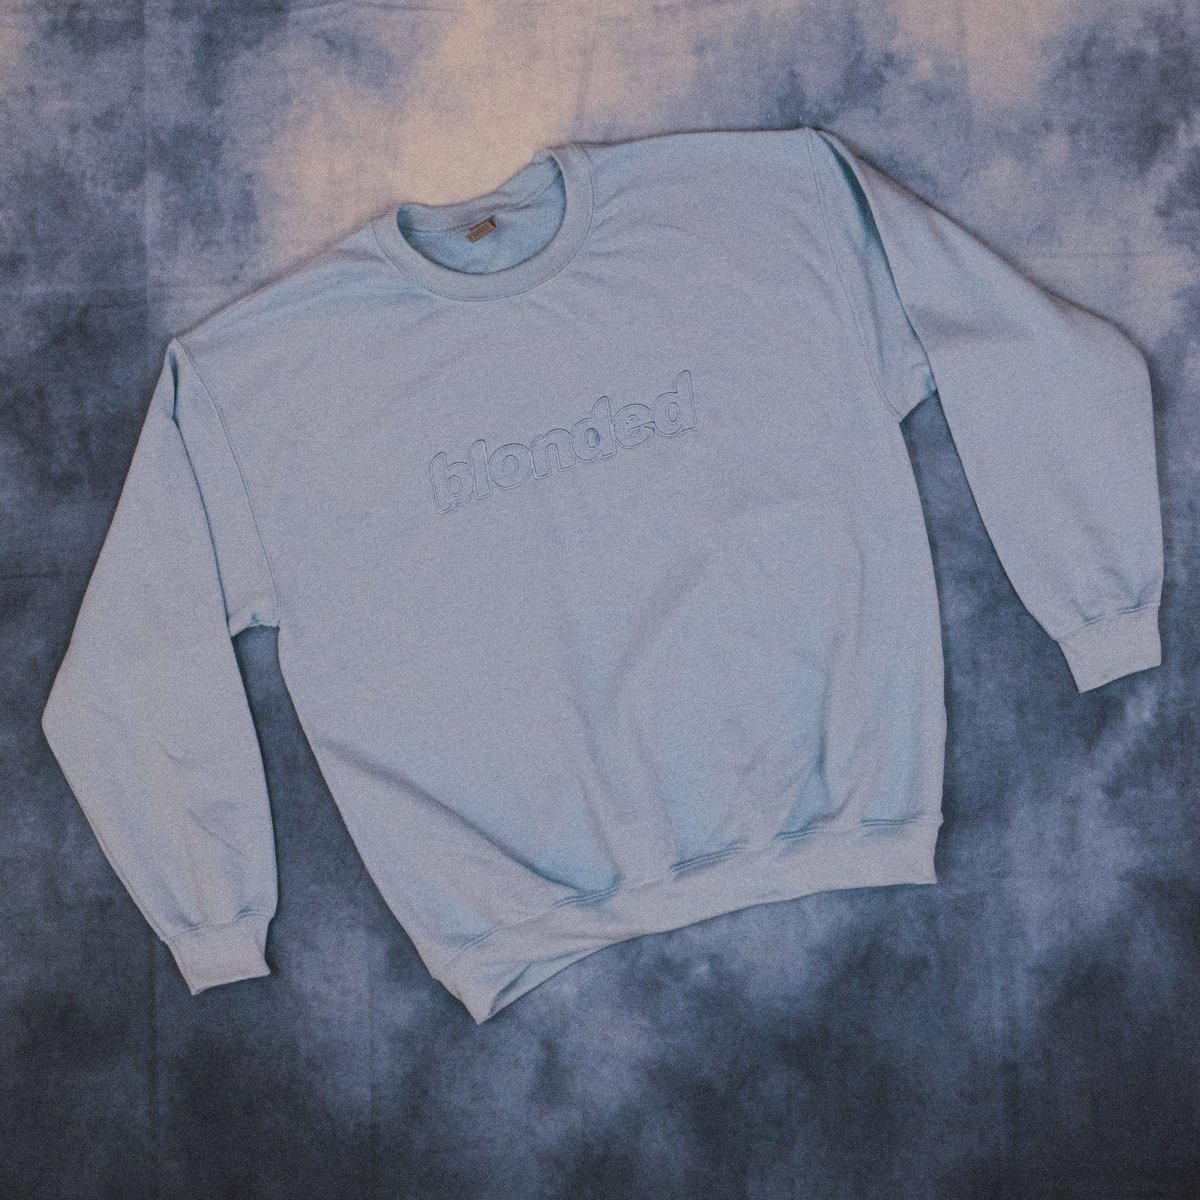 Frank Ocean - Blonded Unisex Embroidered Sweater